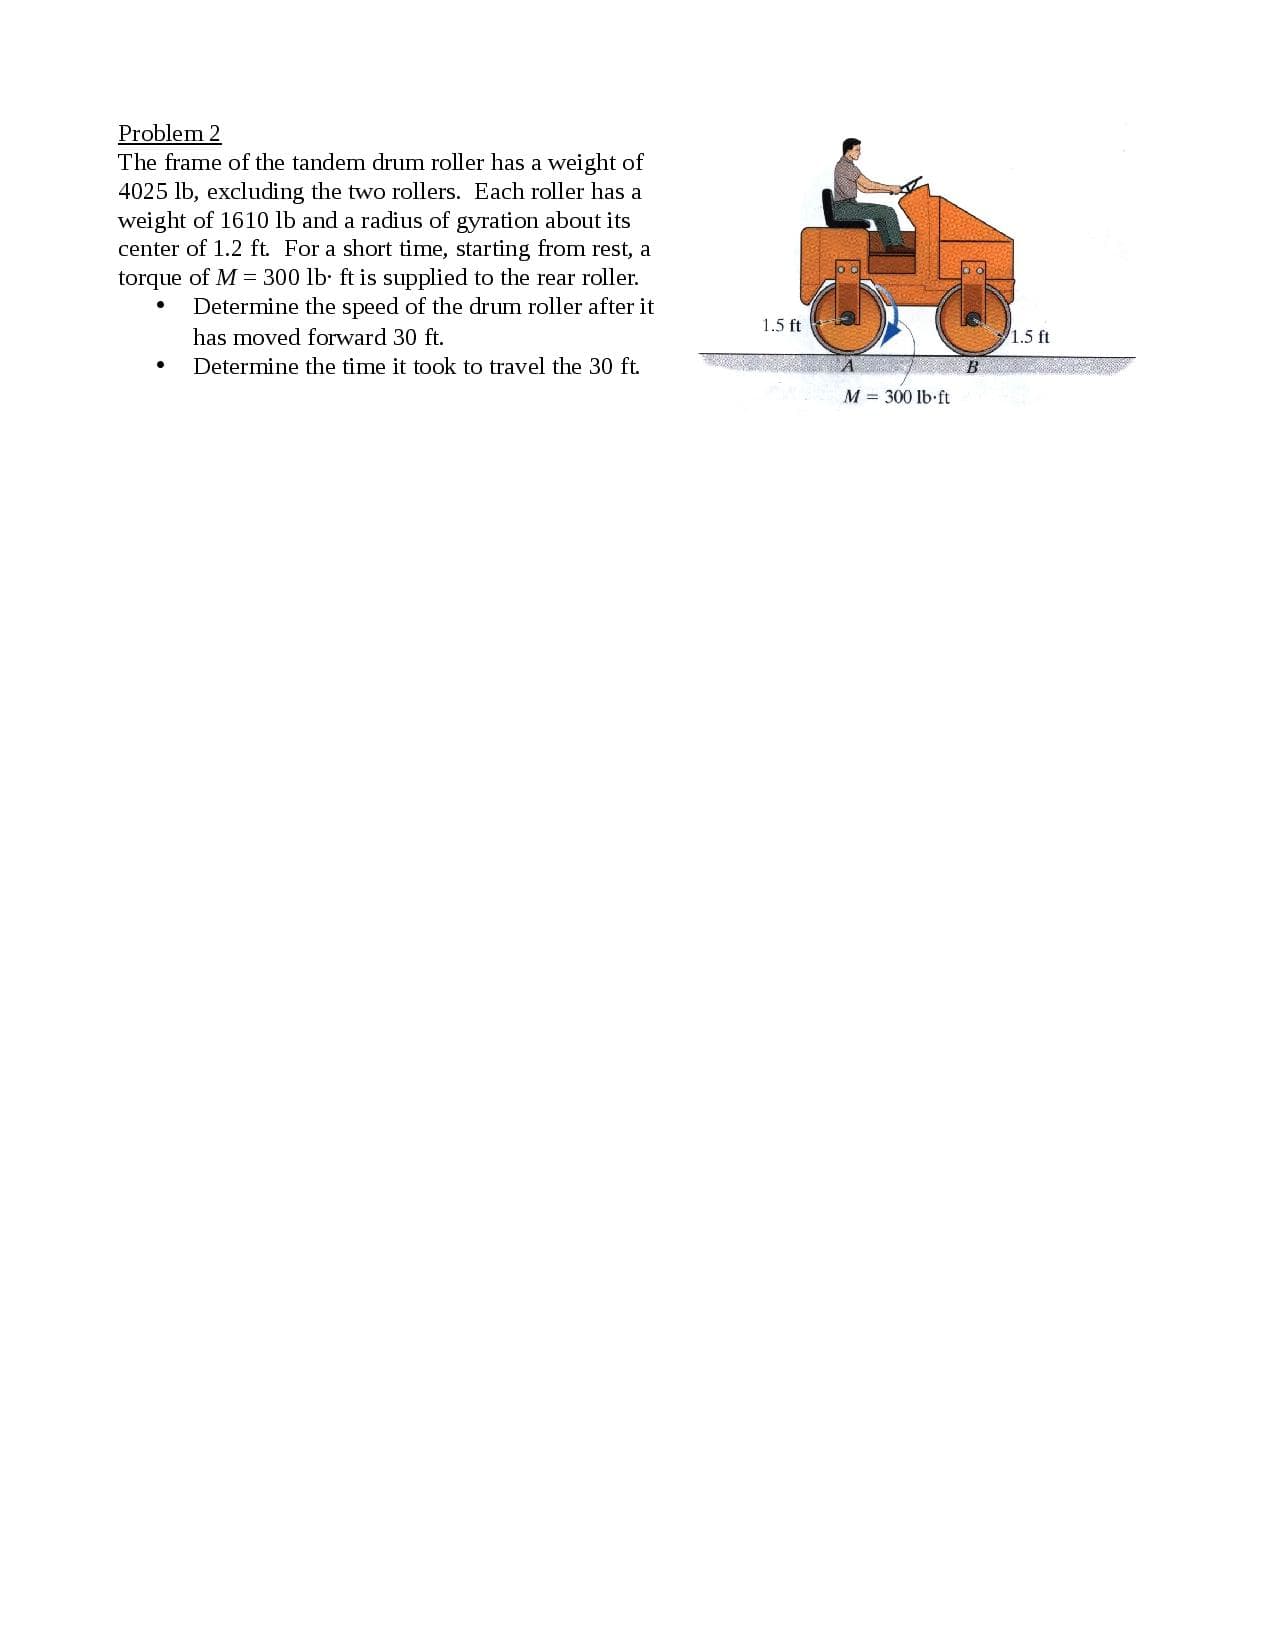 The frame of the tandem drum roller has a weight of
4025 lb, excluding the two rollers. Each roller has a
weight of 1610 lb and a radius of gyration about its
center of 1.2 ft. For a short time, starting from rest, a
torque of M = 300 lb ft is supplied to the rear roller.
Determine the speed of the drum roller after it
has moved forward 30 ft.
Determine the time it took to travel the 30 ft.
